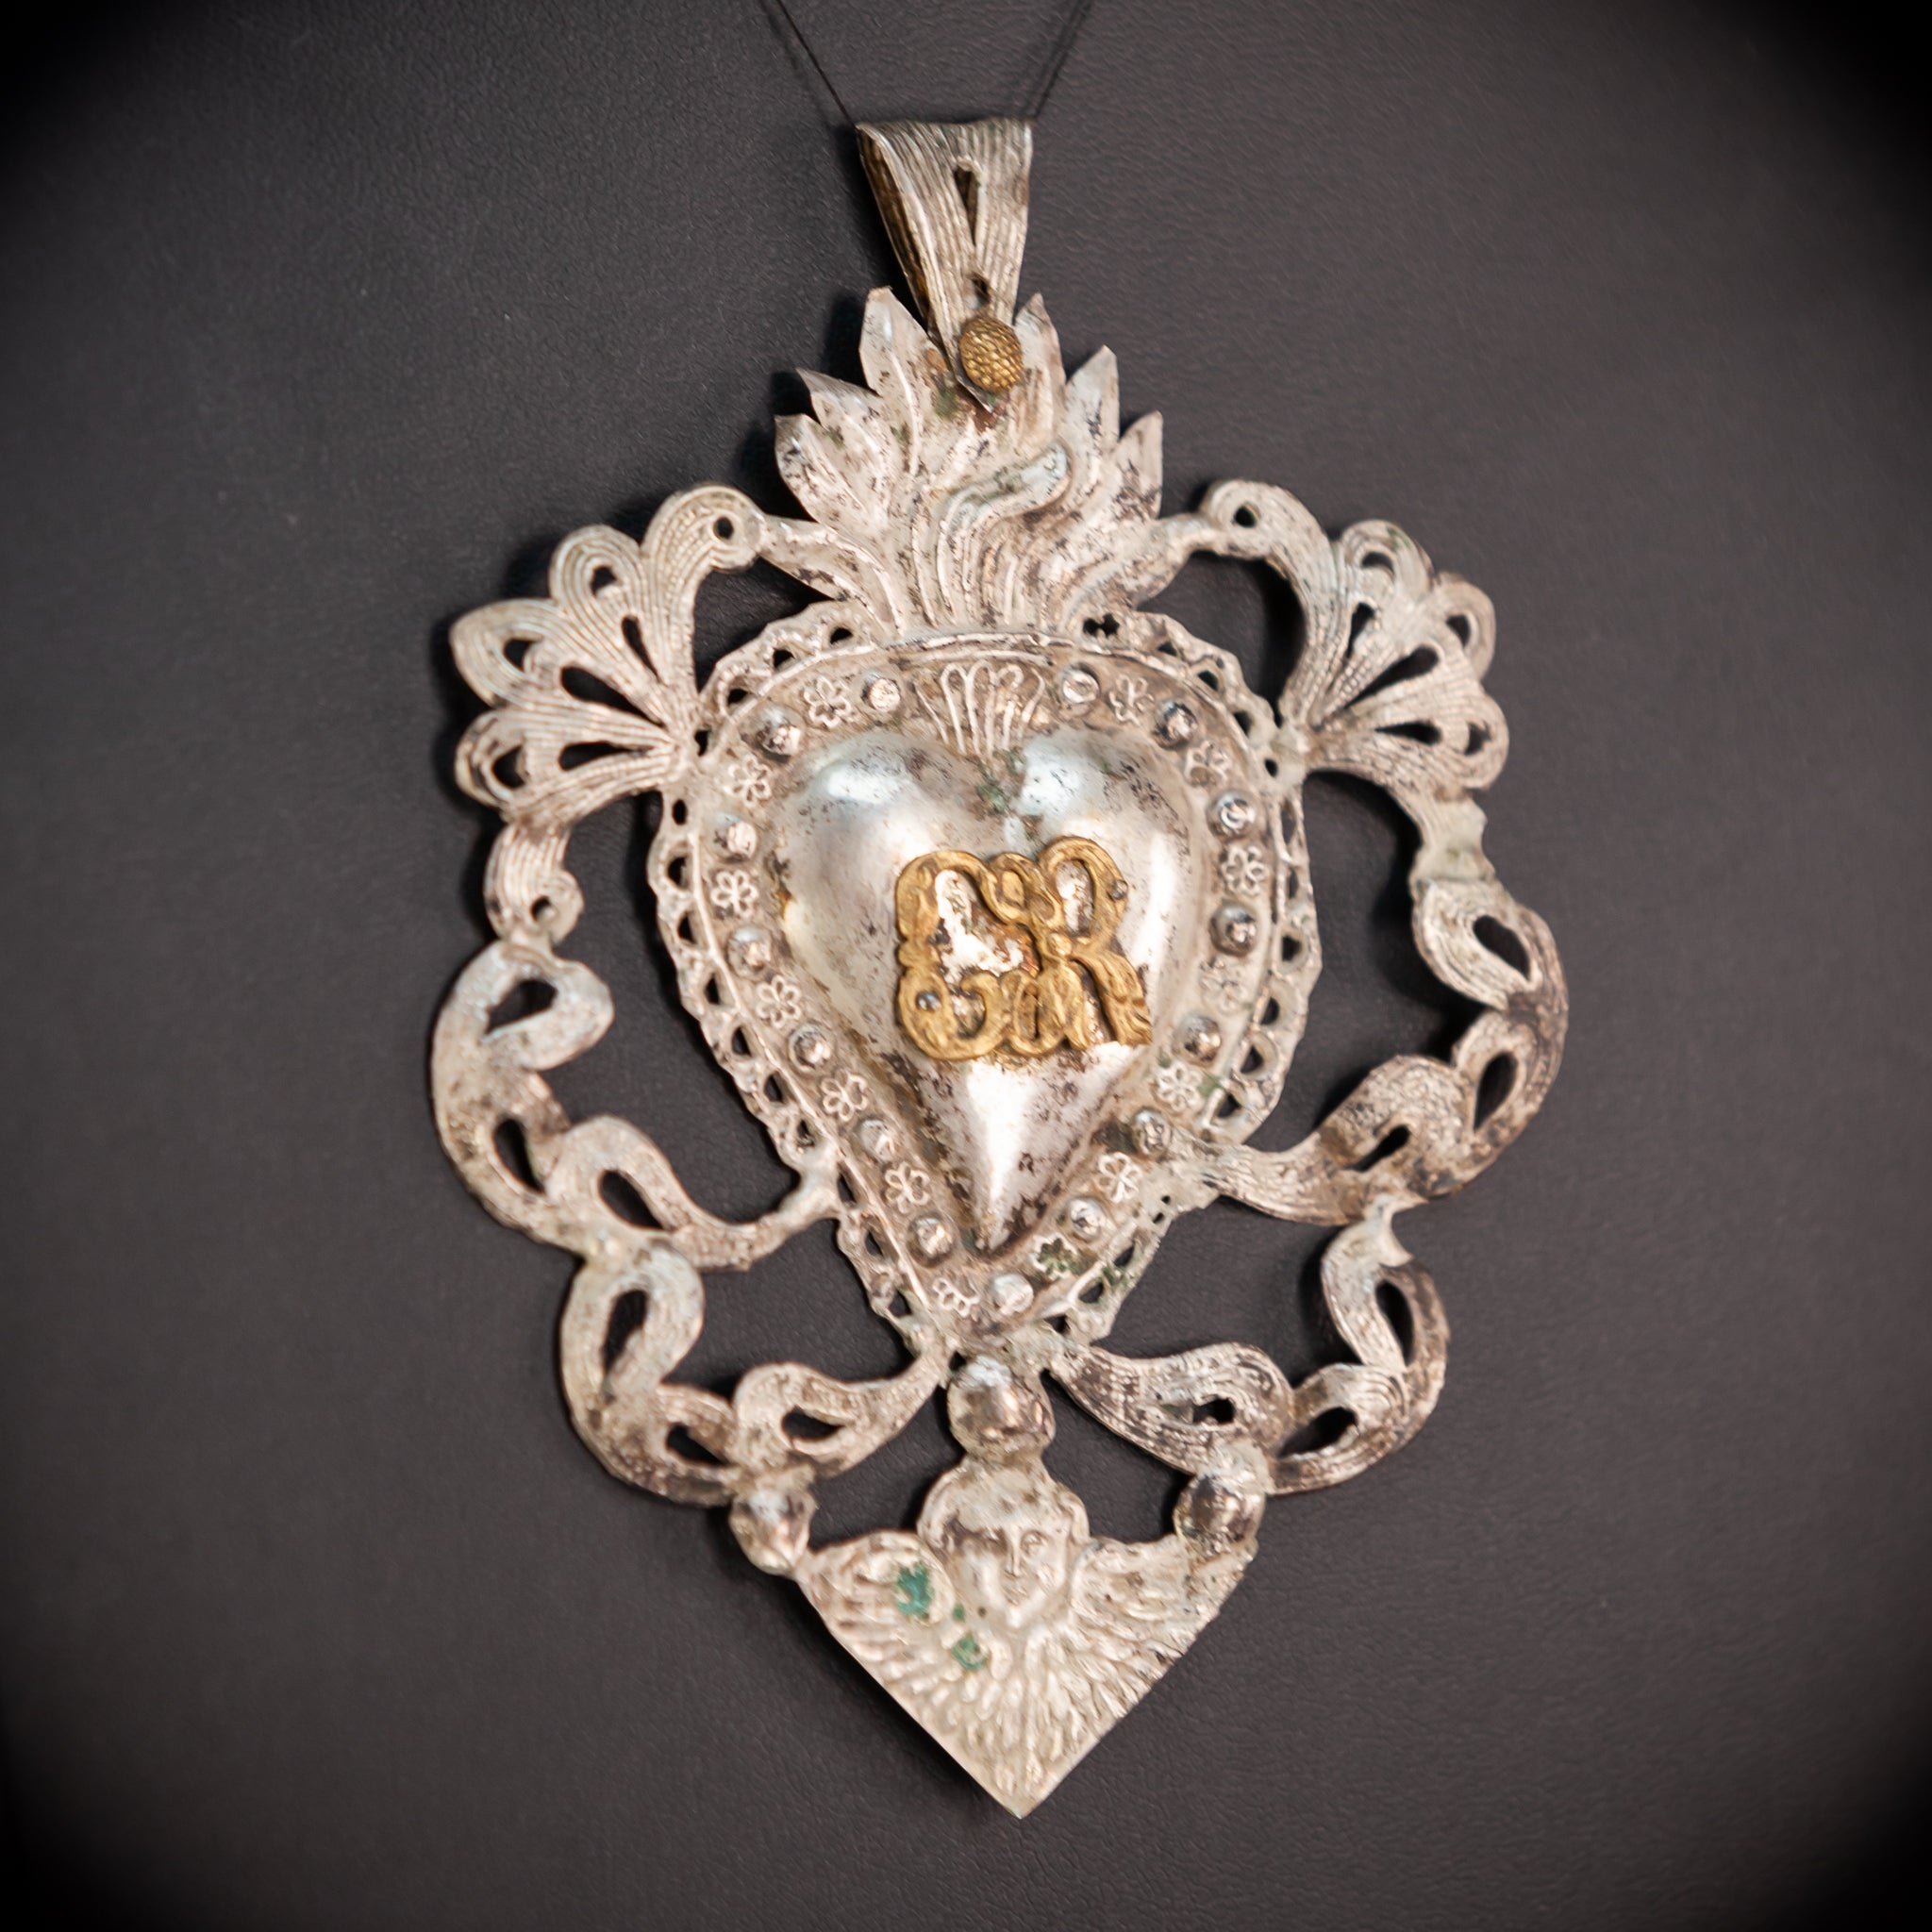 Solid Silver Votive Heart | 1800s Grace Received 4.7"